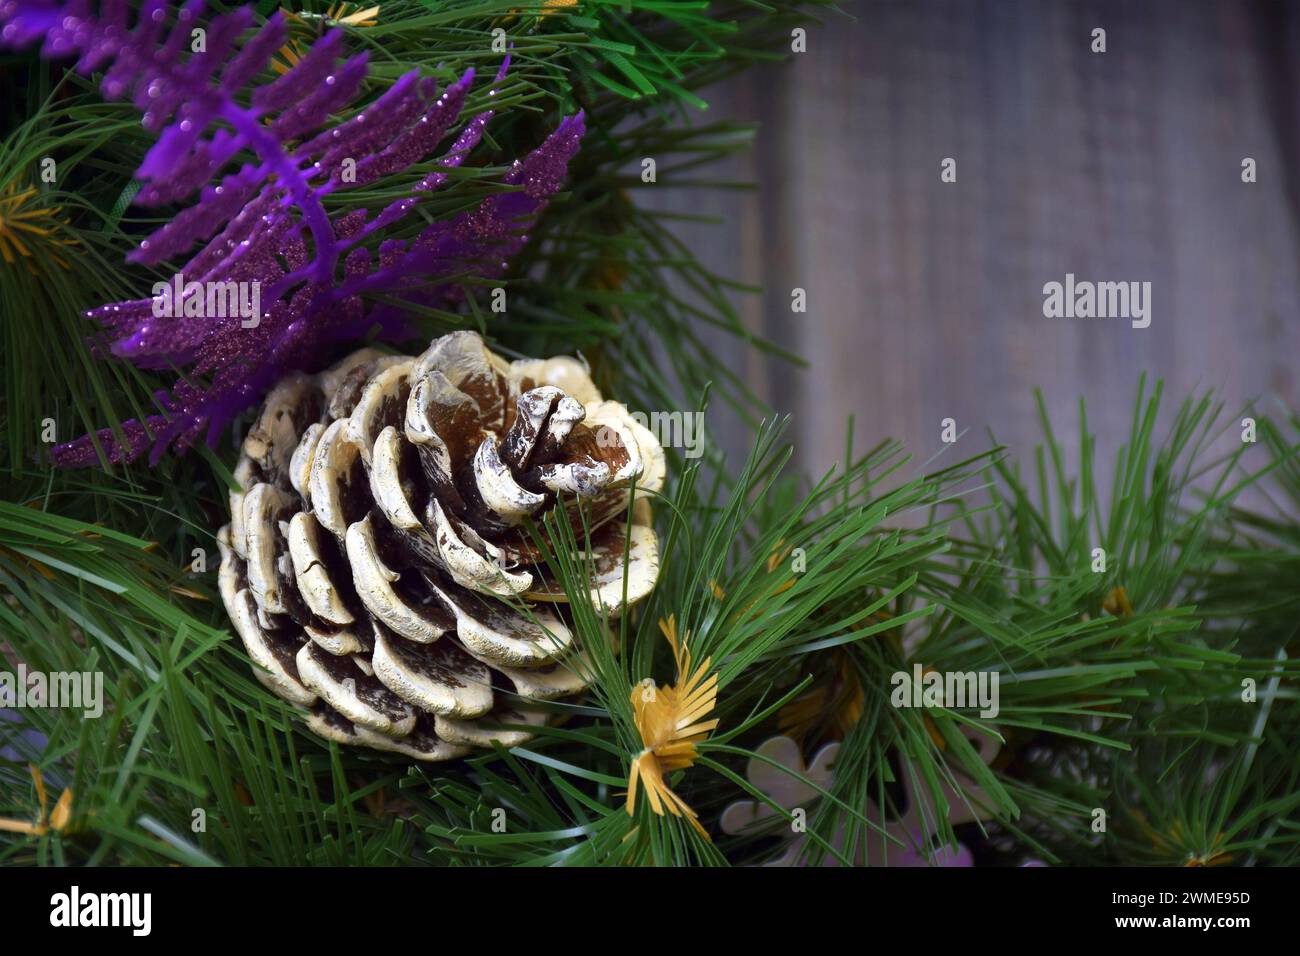 Christmas decor, close-up. A festive wreath on an old wooden door. Christmas traditions. Comfort. Family values. Stock Photo